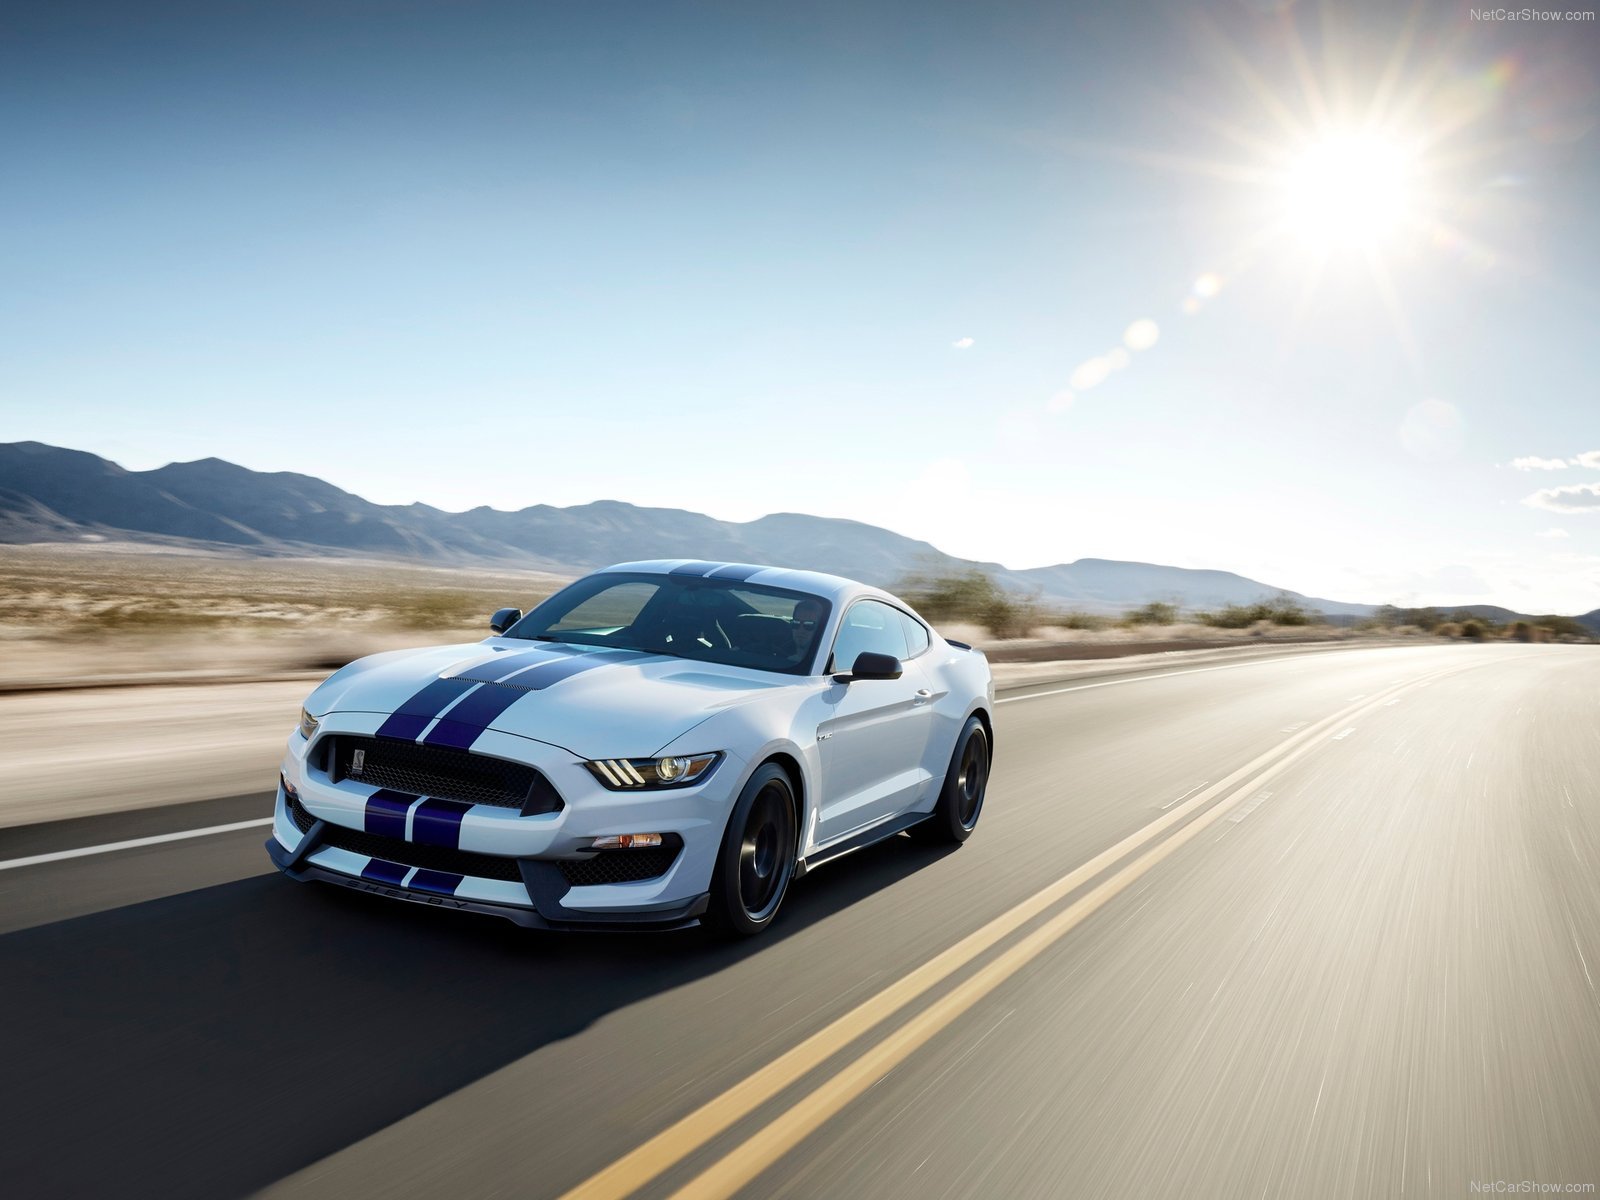 2016, Cars, Ford mustang, Gt350, Motors, Race, Shelby, Speed, Super Wallpaper